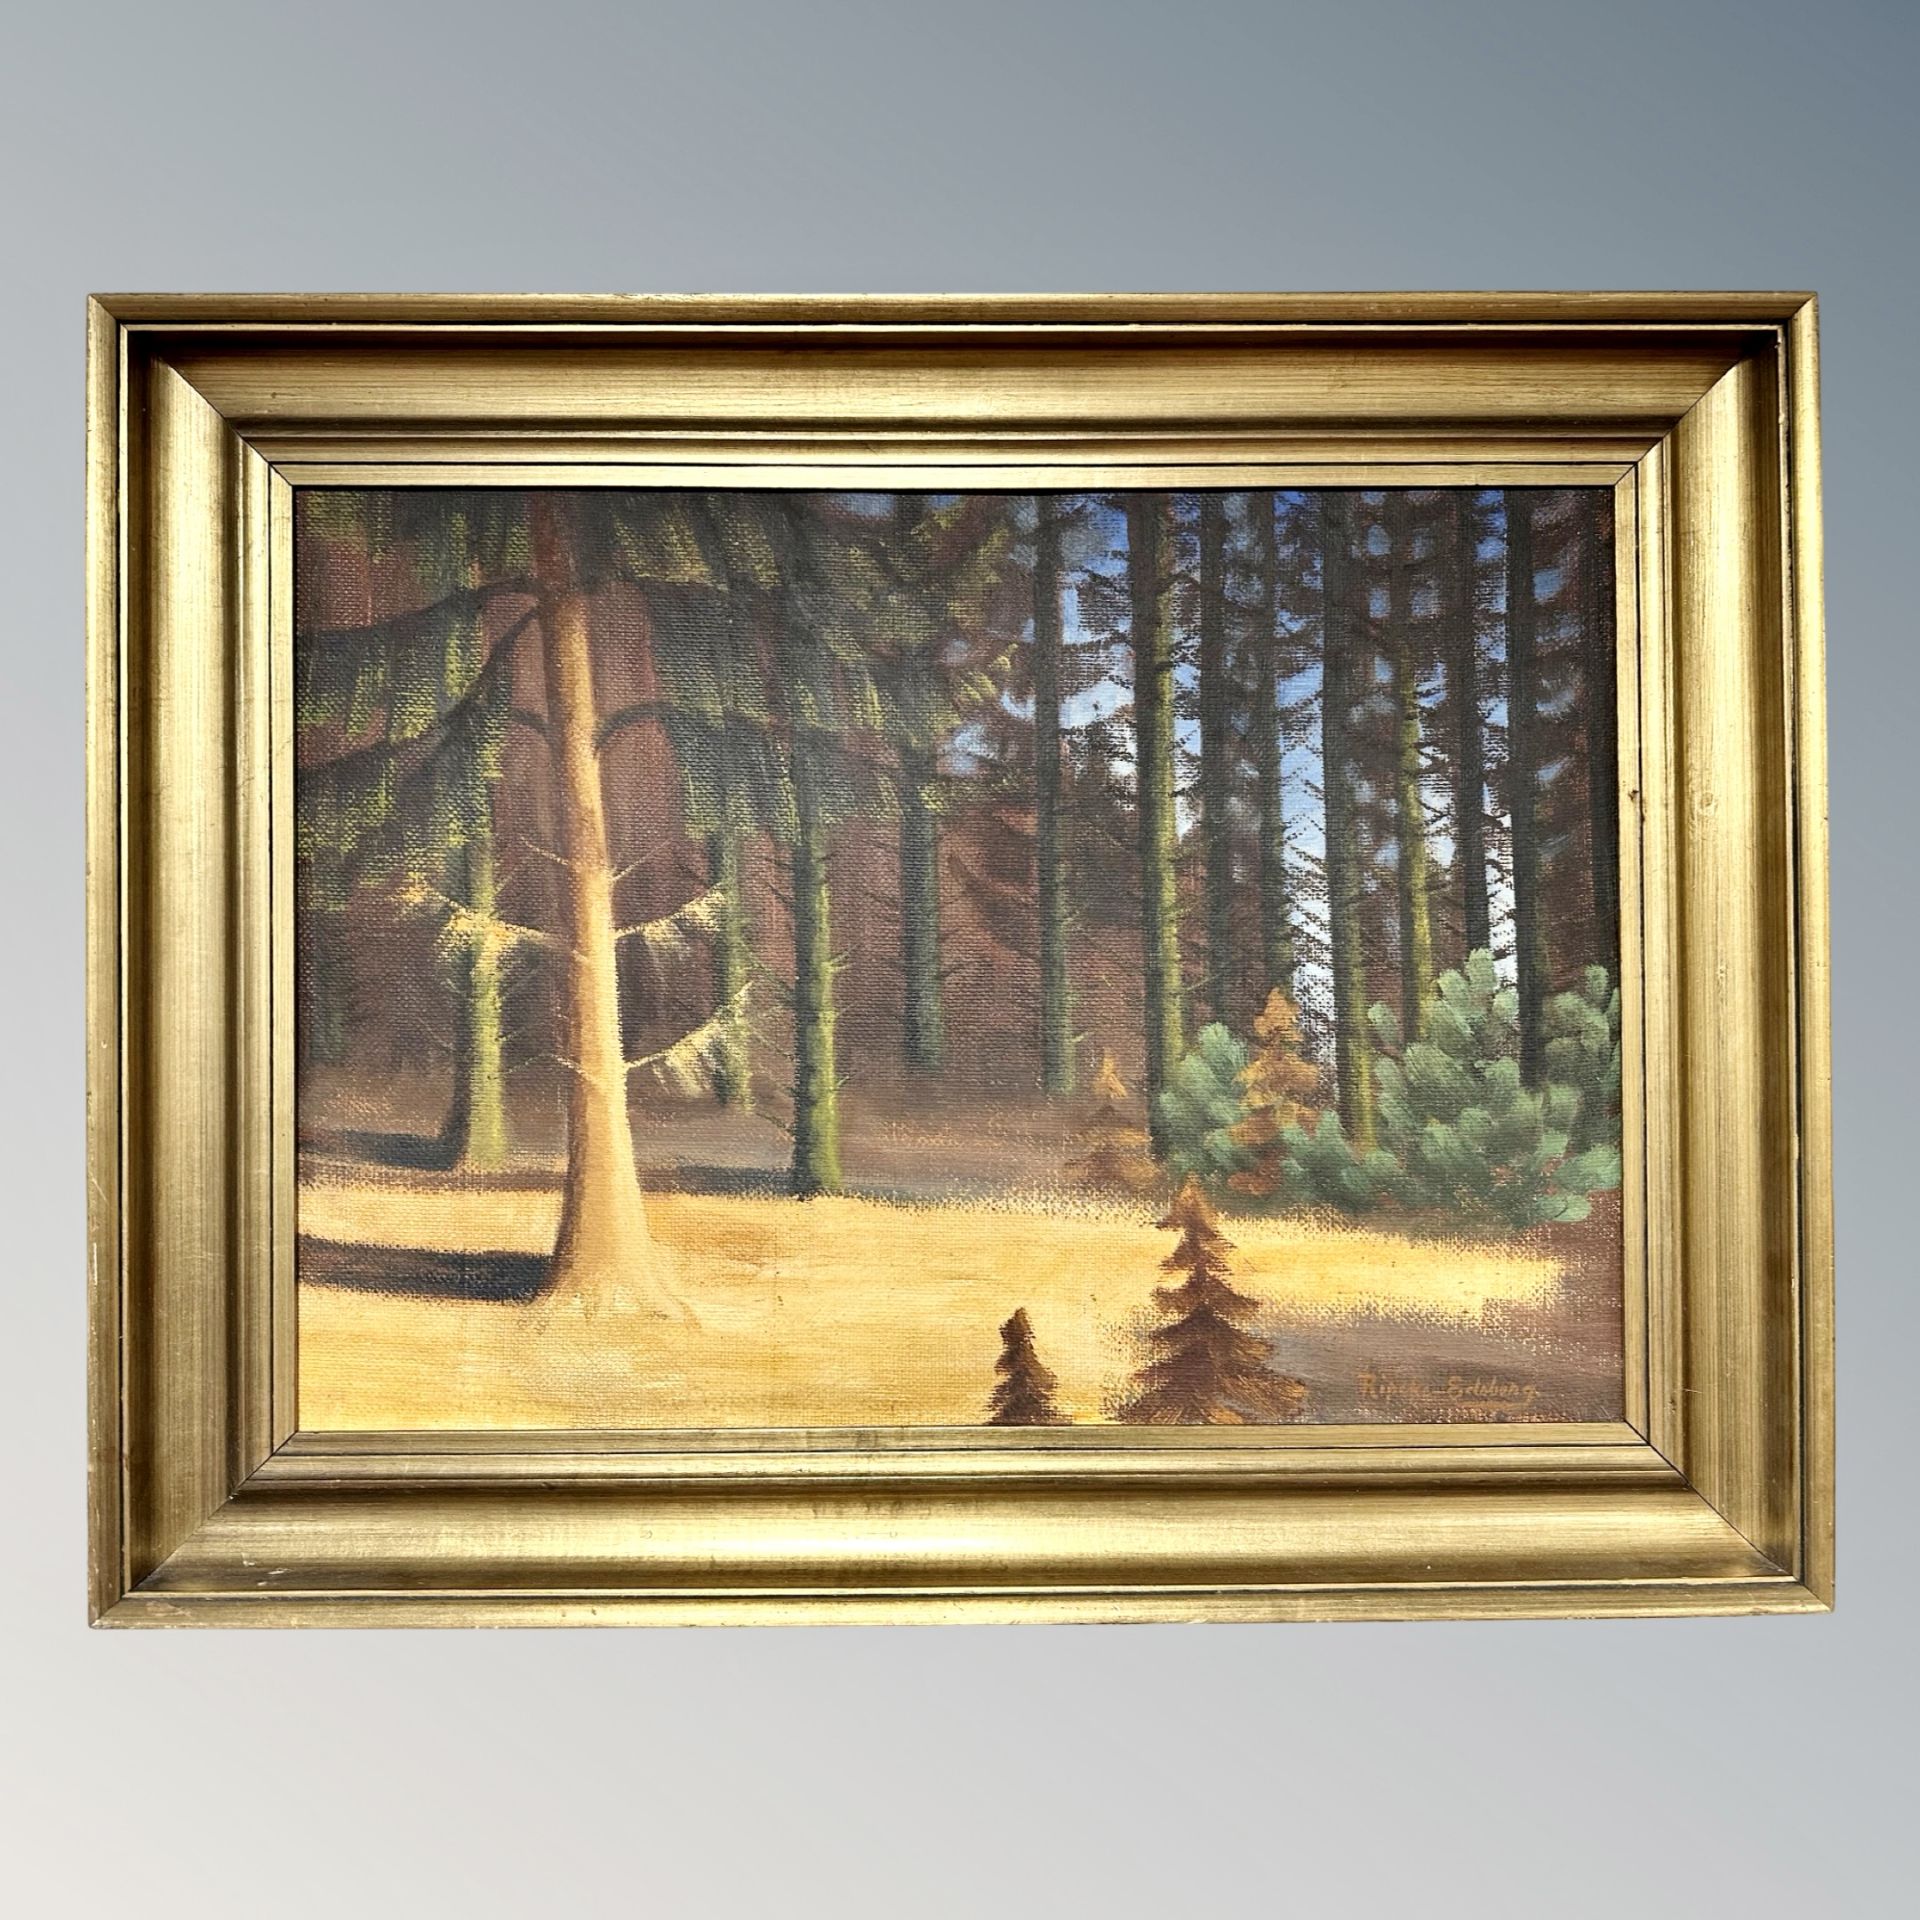 Rincke Edsbung : A view in a forest, oil on canvas,